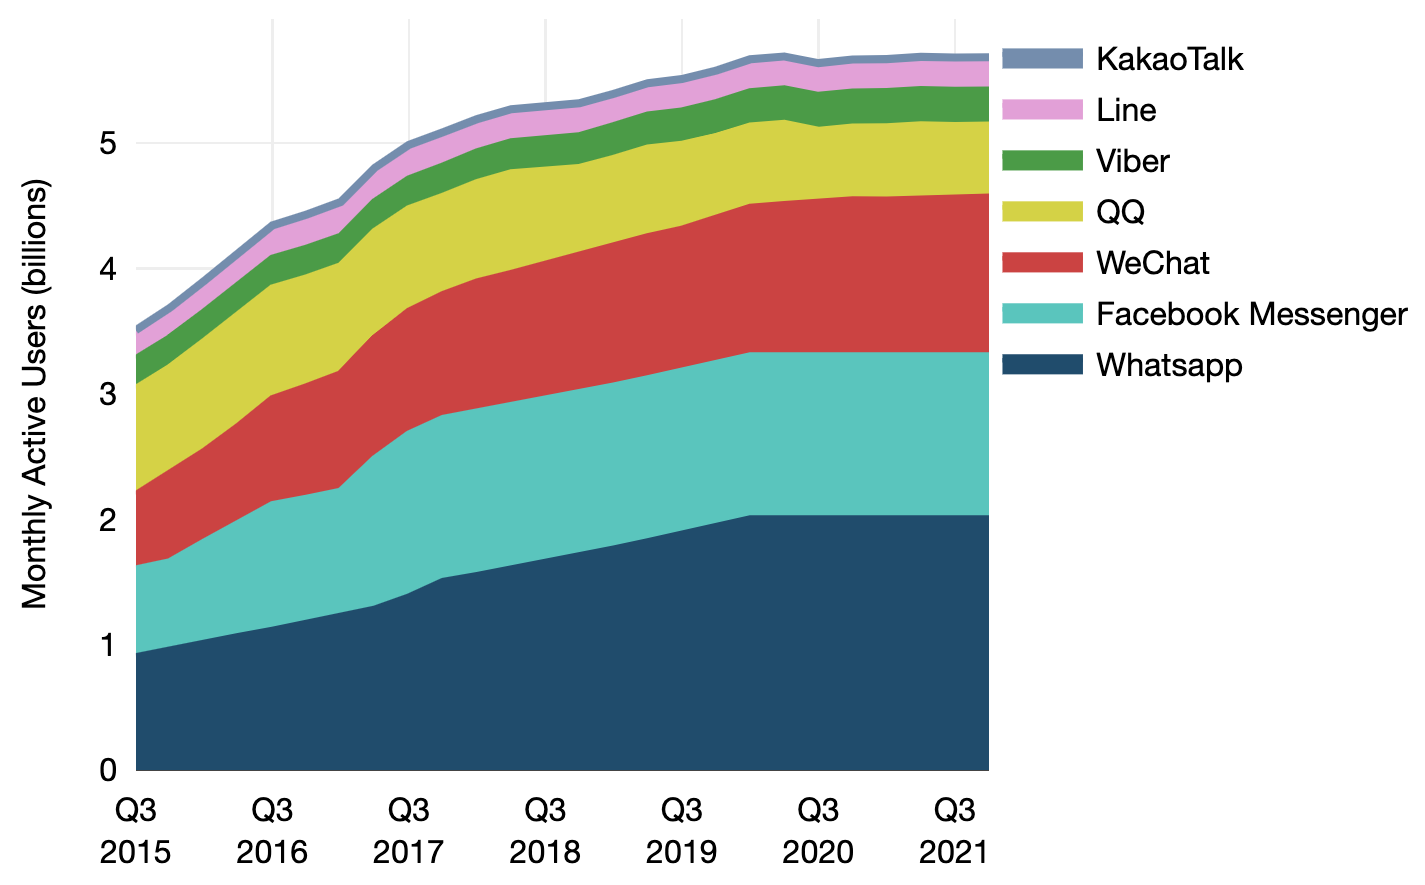 Monthly Active Users of Major Messaging Applications